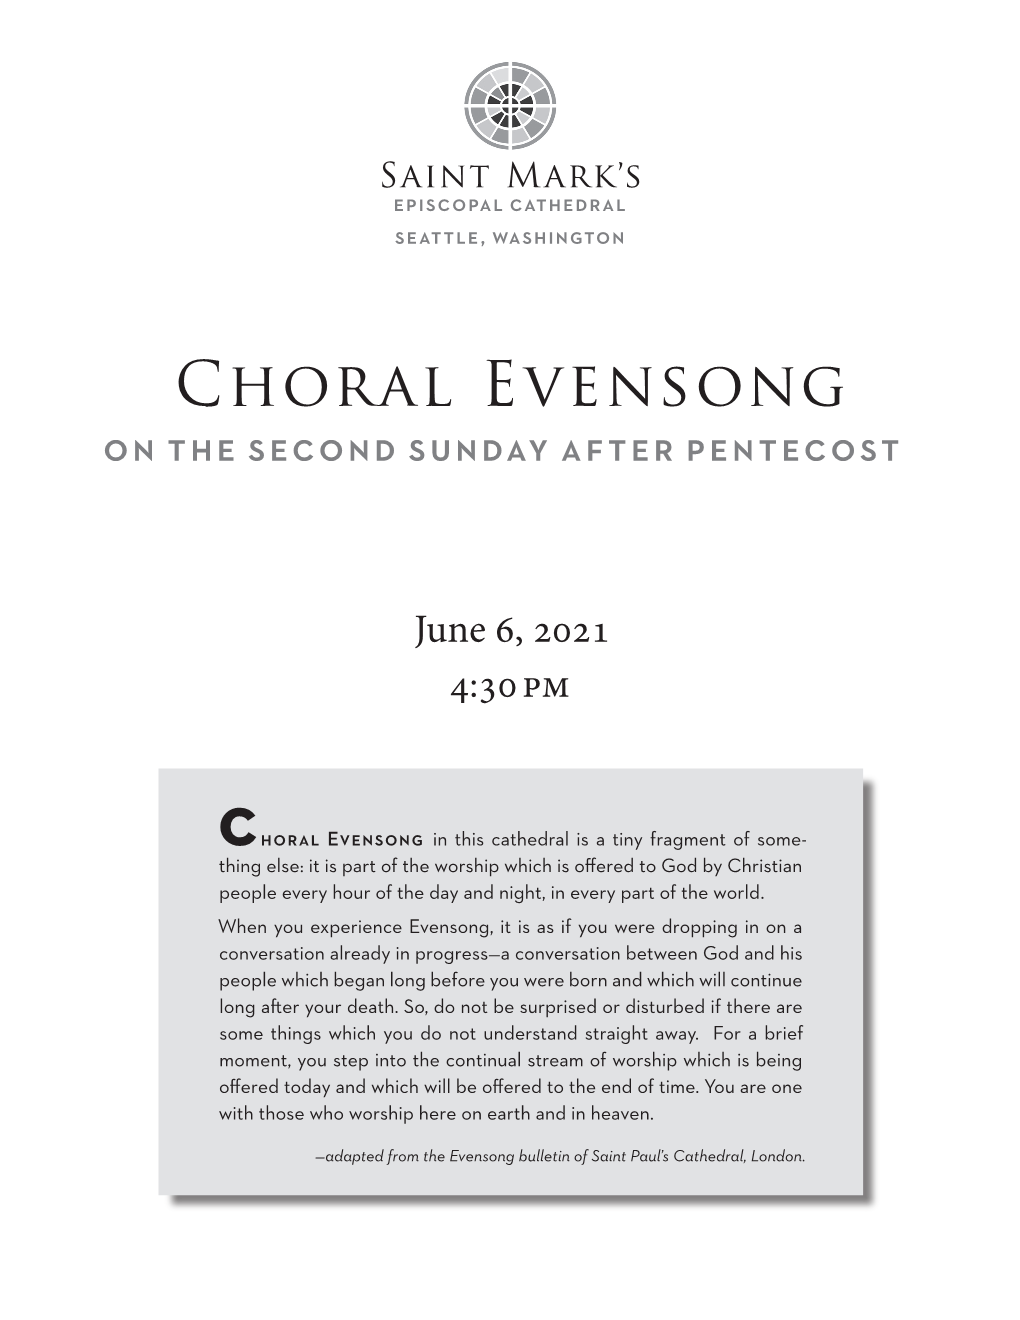 Choral Evensong on the Second Sunday After Pentecost